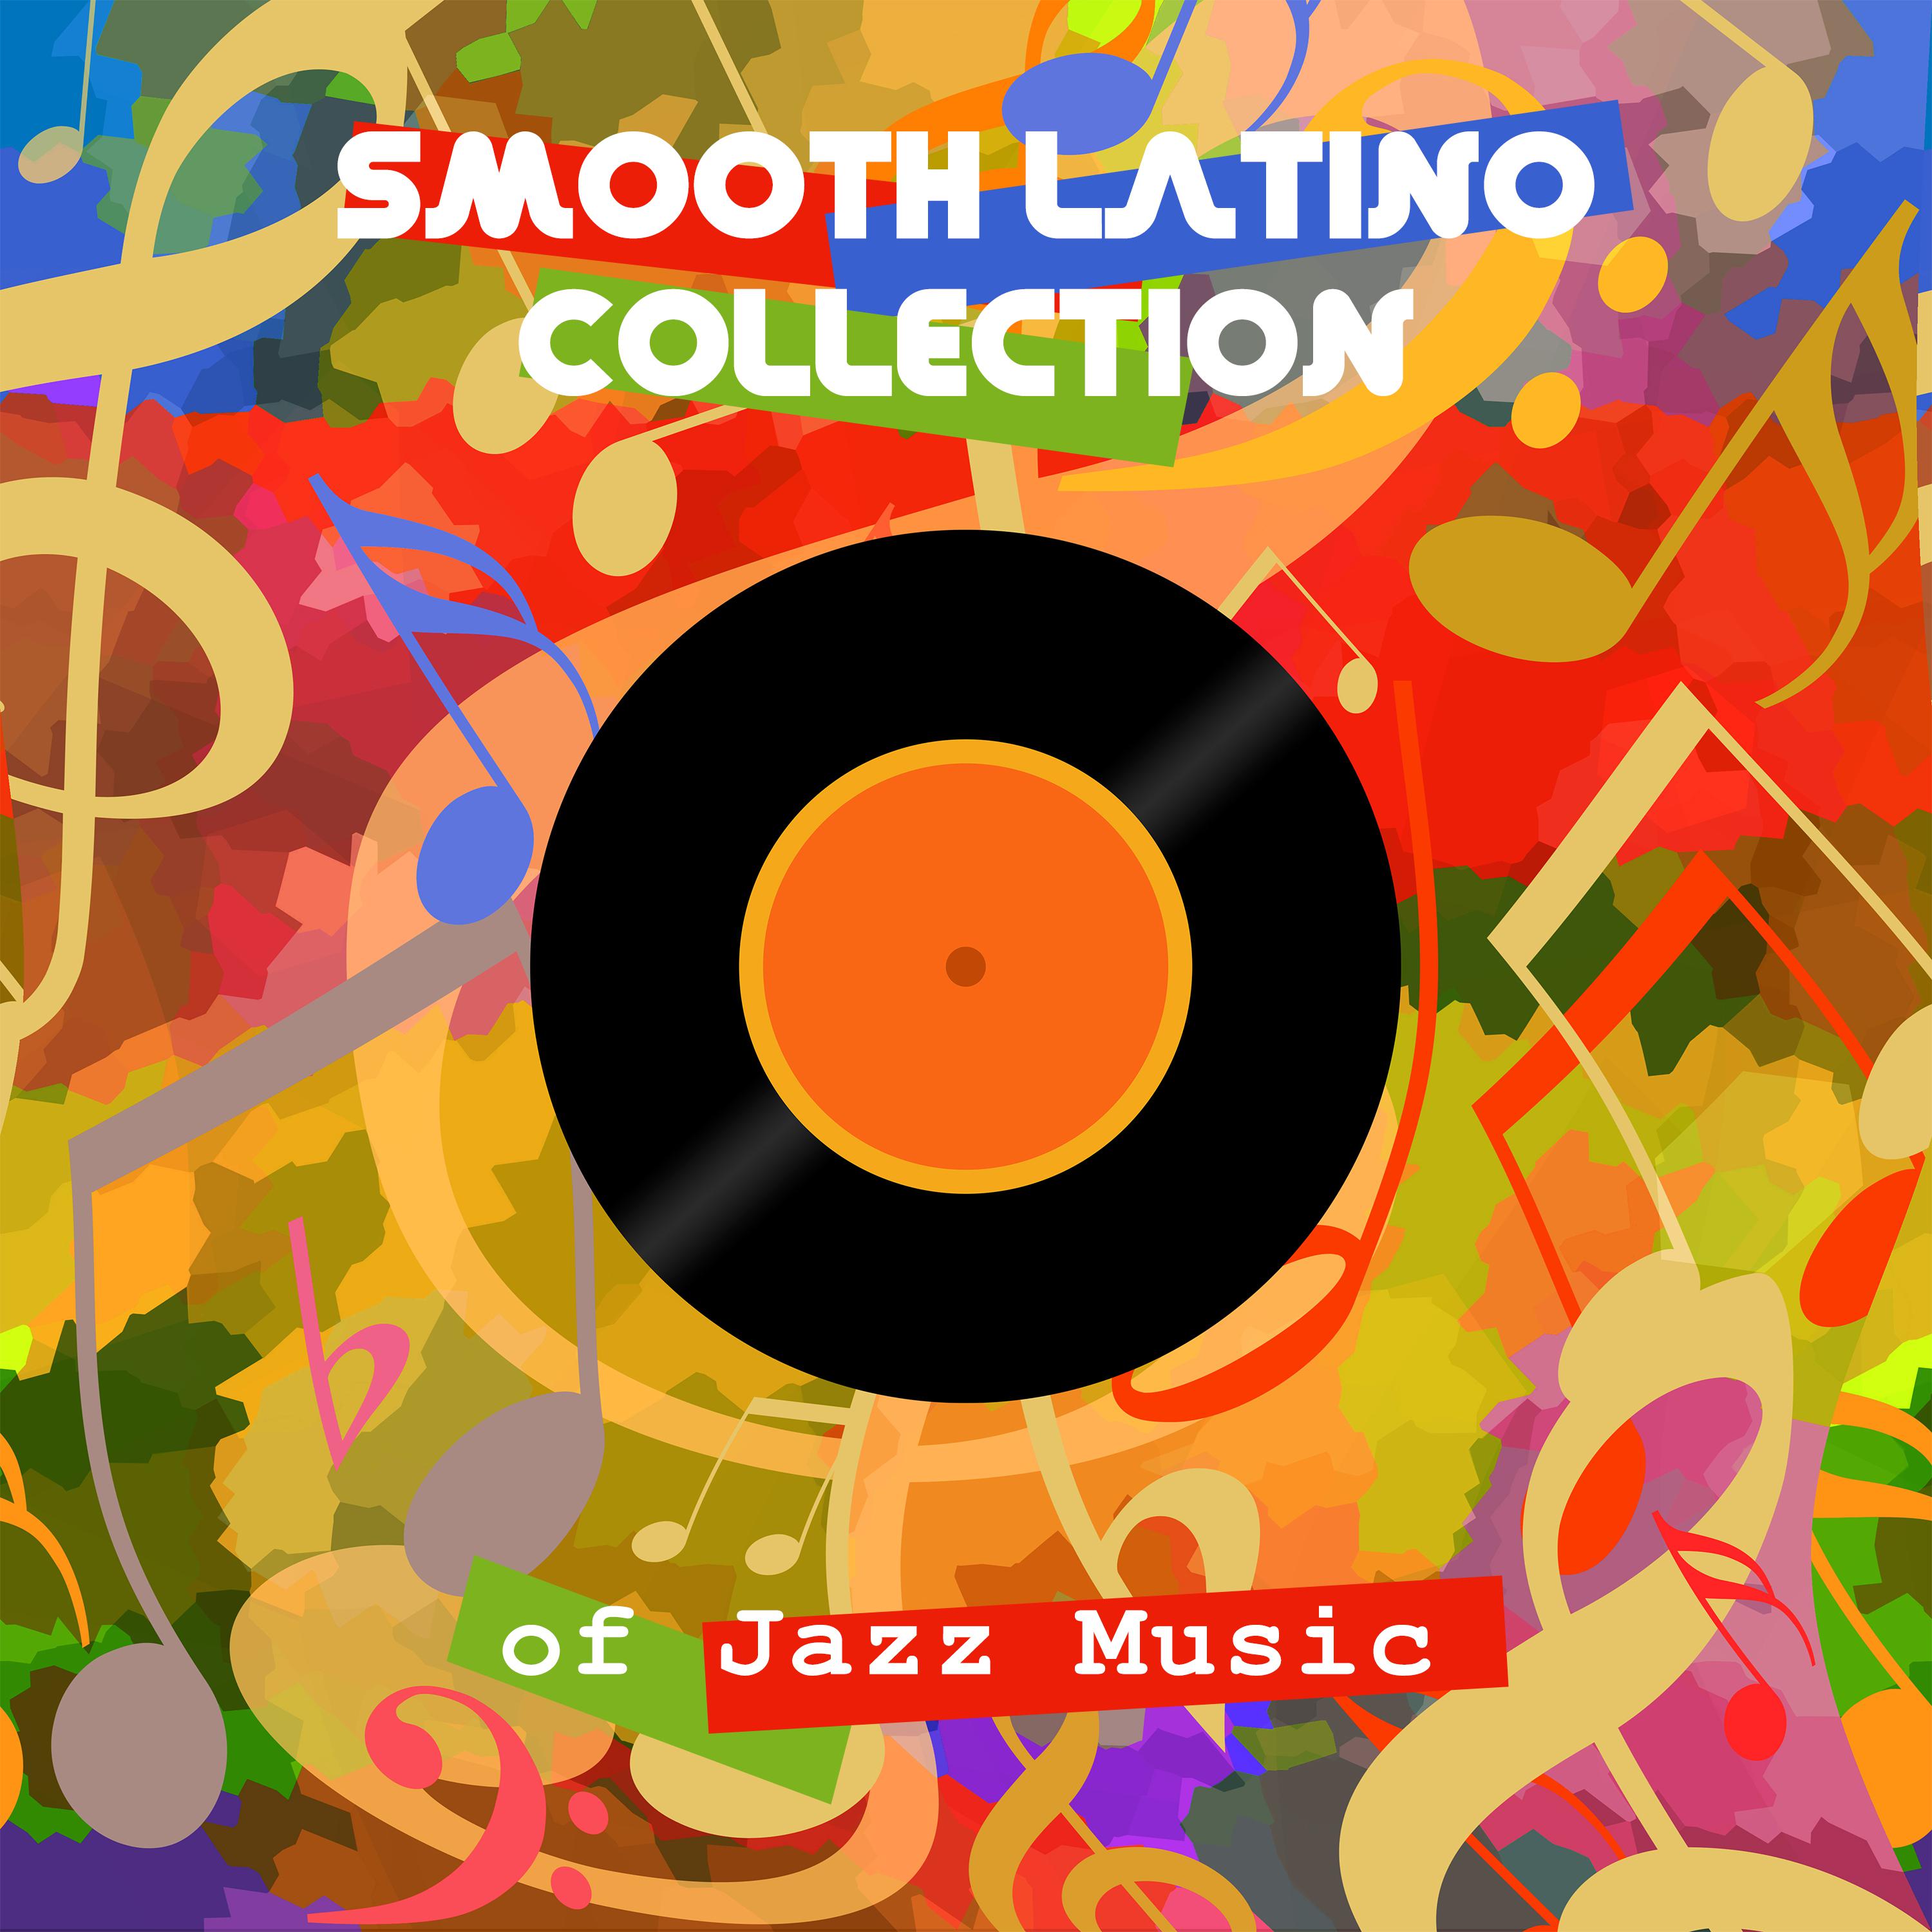 Smooth Latino Collection of Jazz Music: 15 Calm Songs in Bossa Nova Style